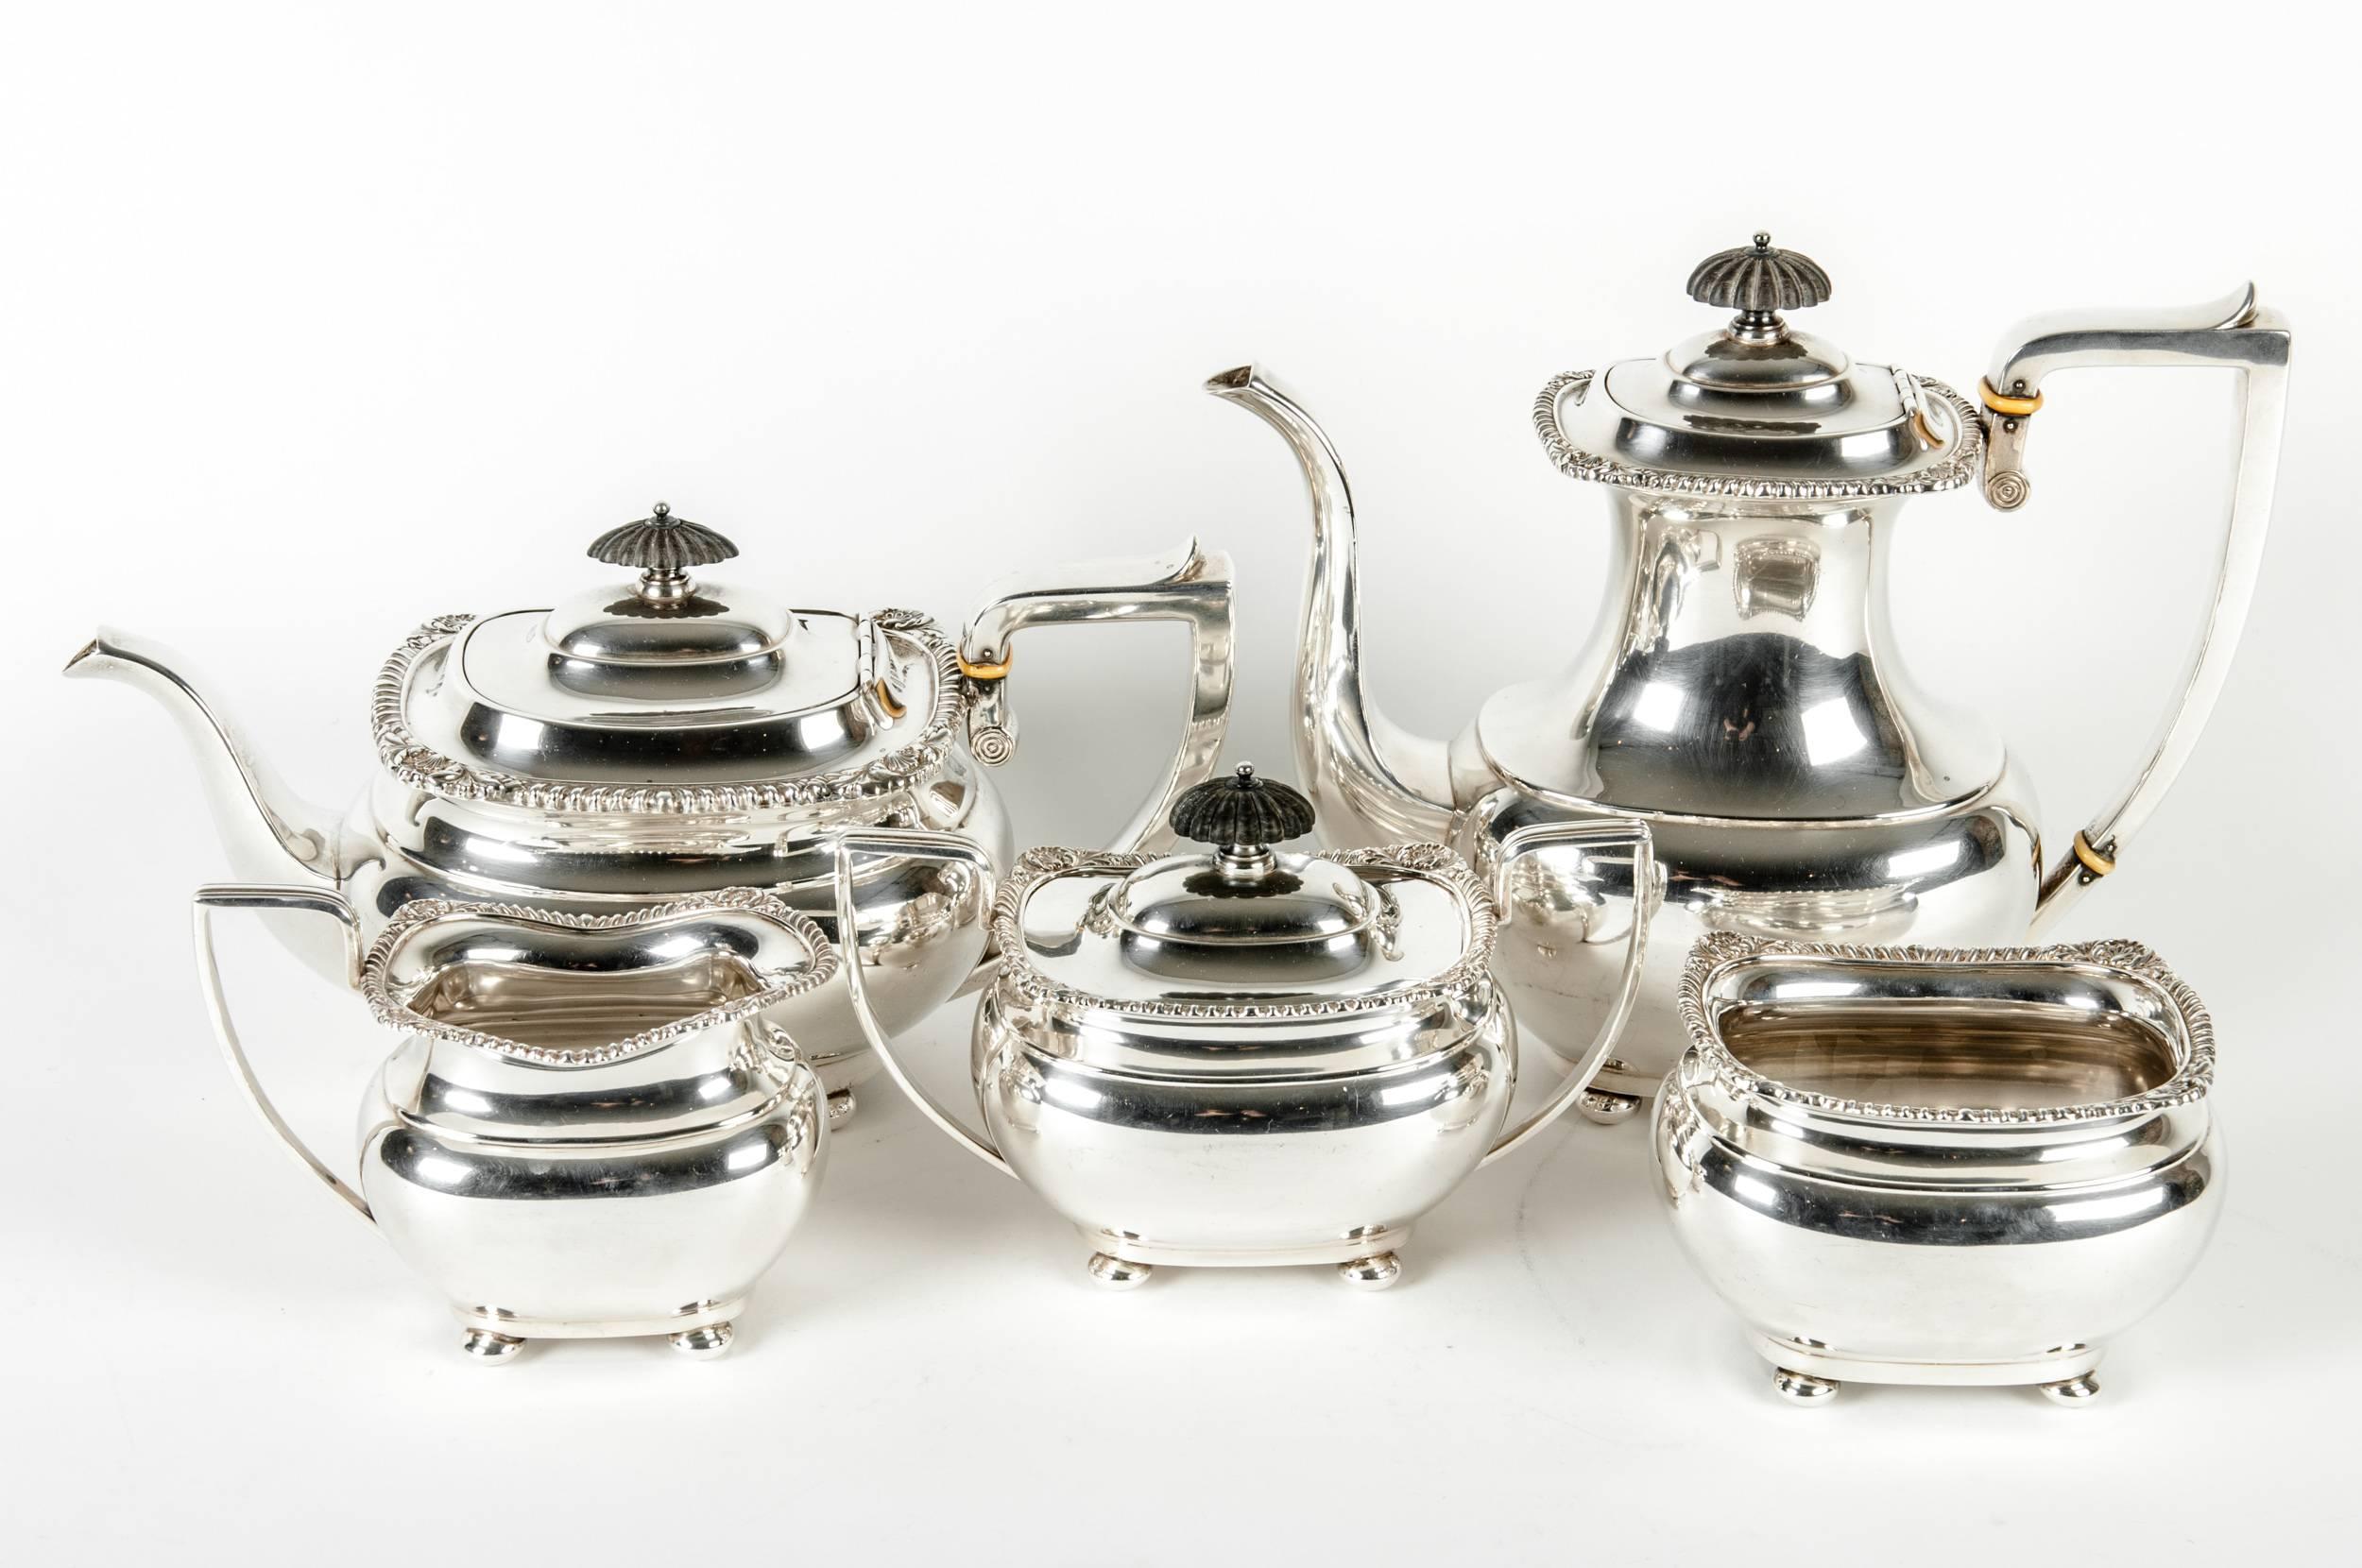 Antique sterling silver tea and coffee service.  The set is in excellent antique condition , maker's mark undersigned .The tea pot measure 12 inches width x 6.5 inches high. The coffee pot measure 11 inches width x 9.5 inches high. The creamer